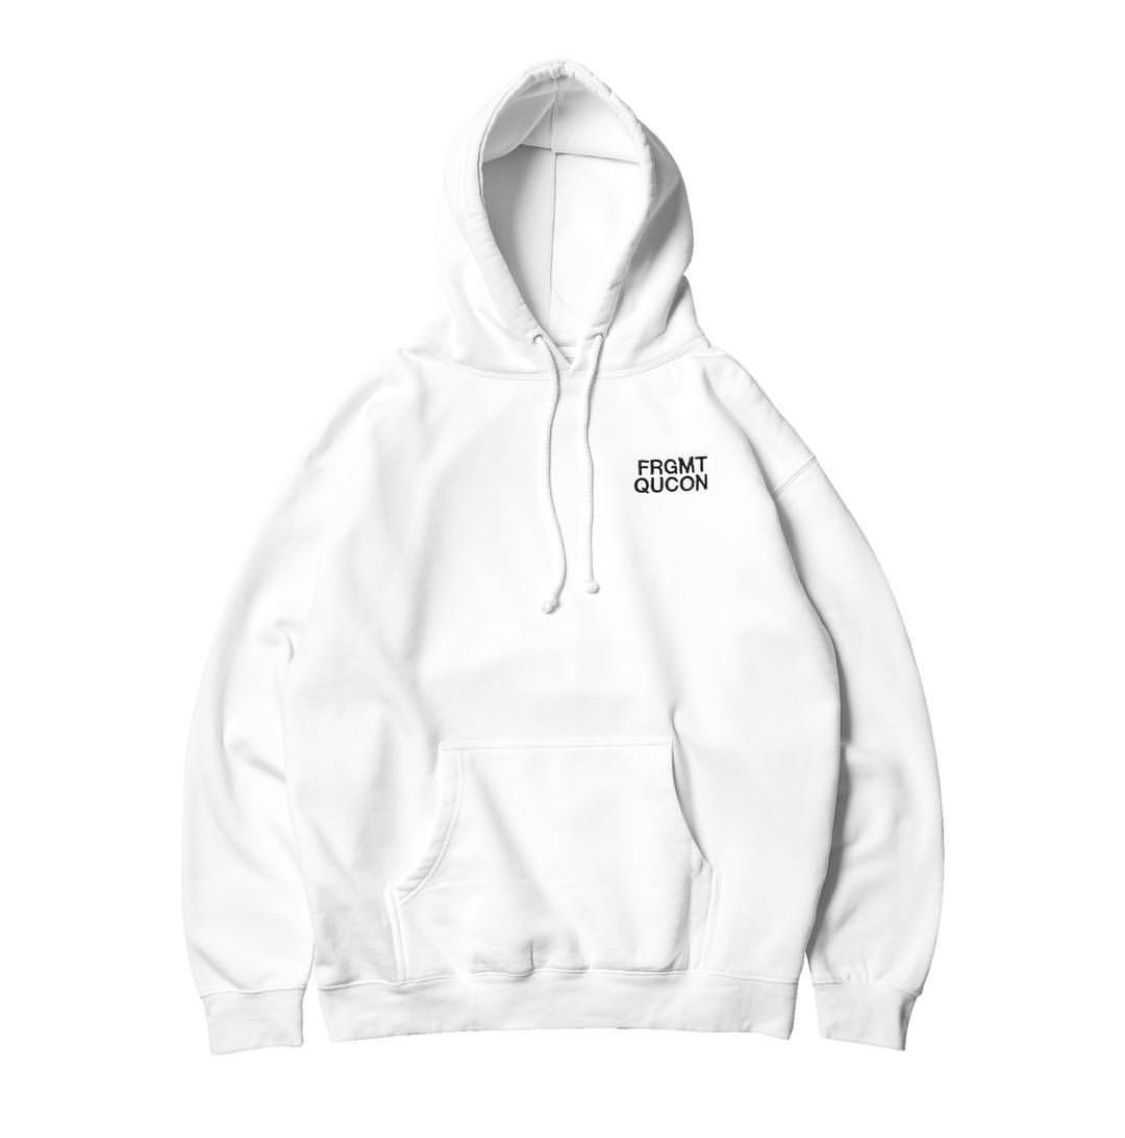 qucon キューコン x フラグメント fragment design type 01 hoodie パーカー white 白 size L  新品未使用 即発送可 他多数出品中